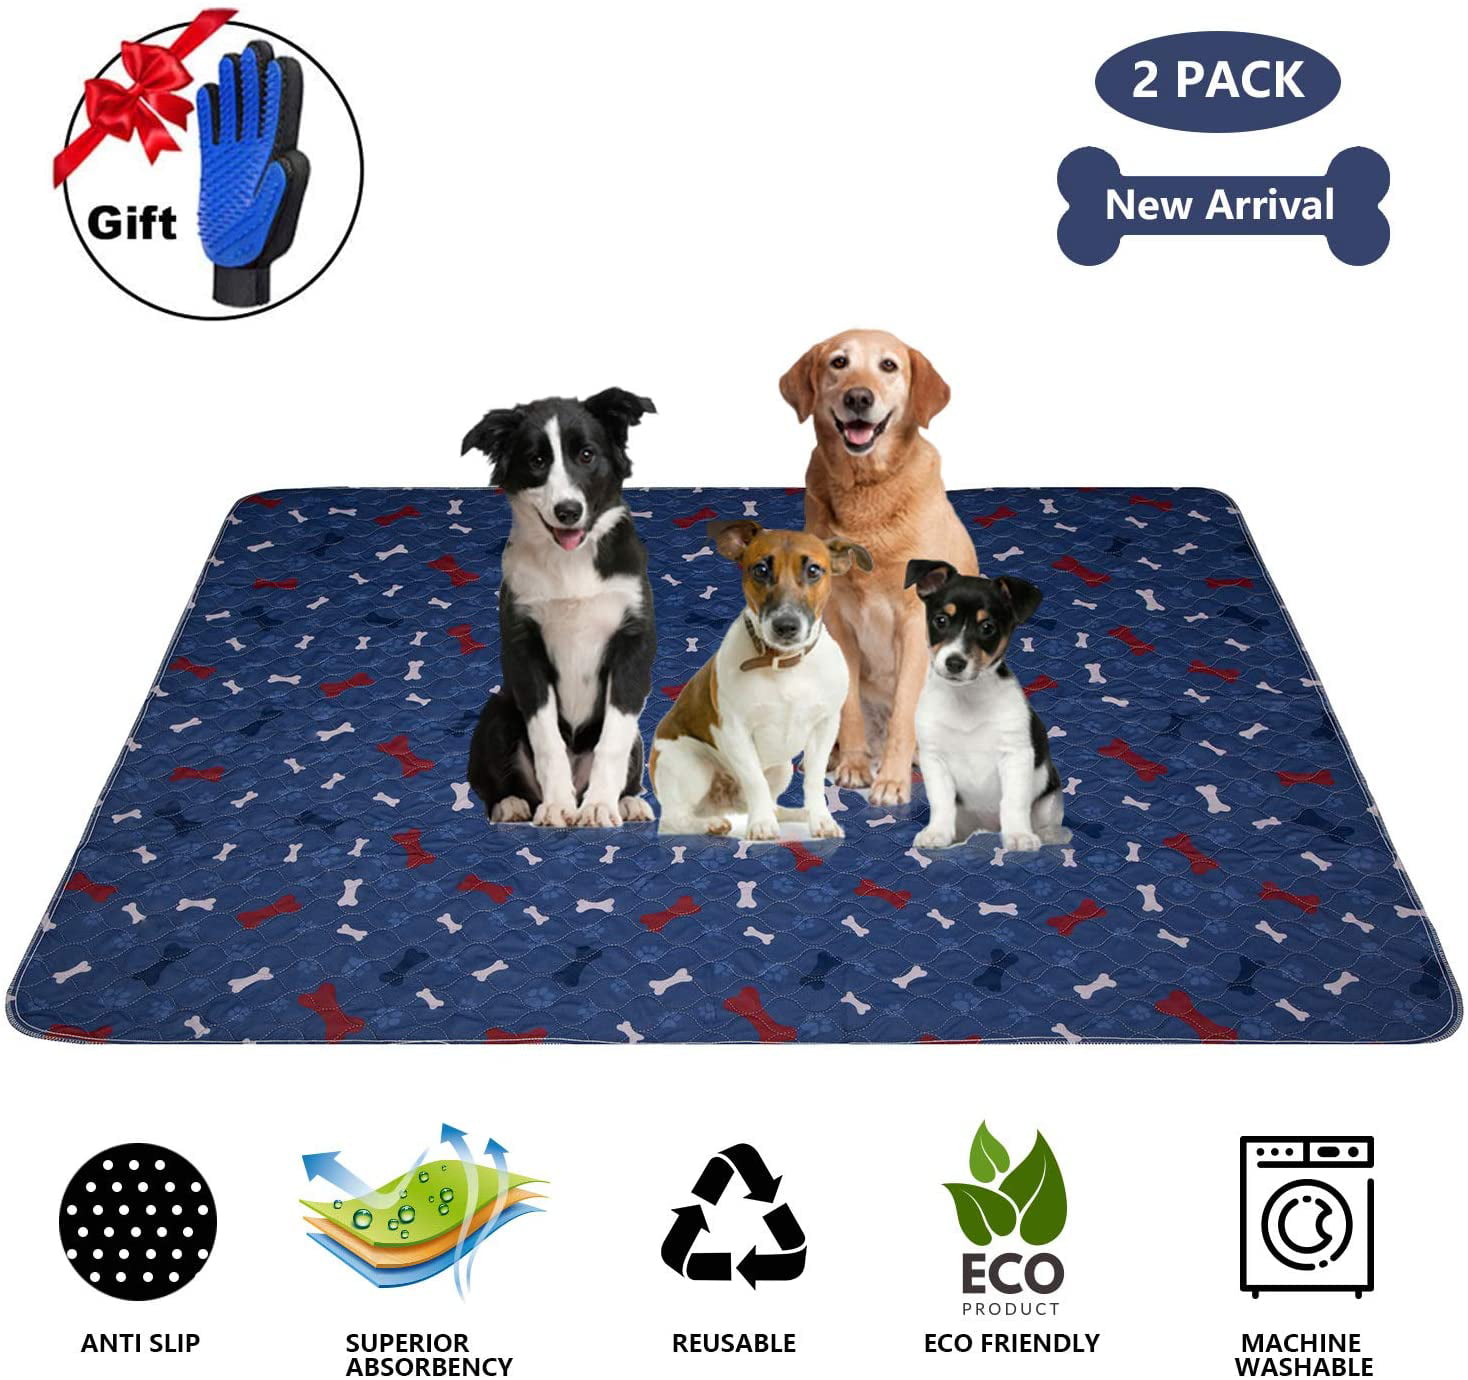 Reusable Absorbent Underpad for Pets 24x35" Dog Cat Pee Pad Washable White C2001 